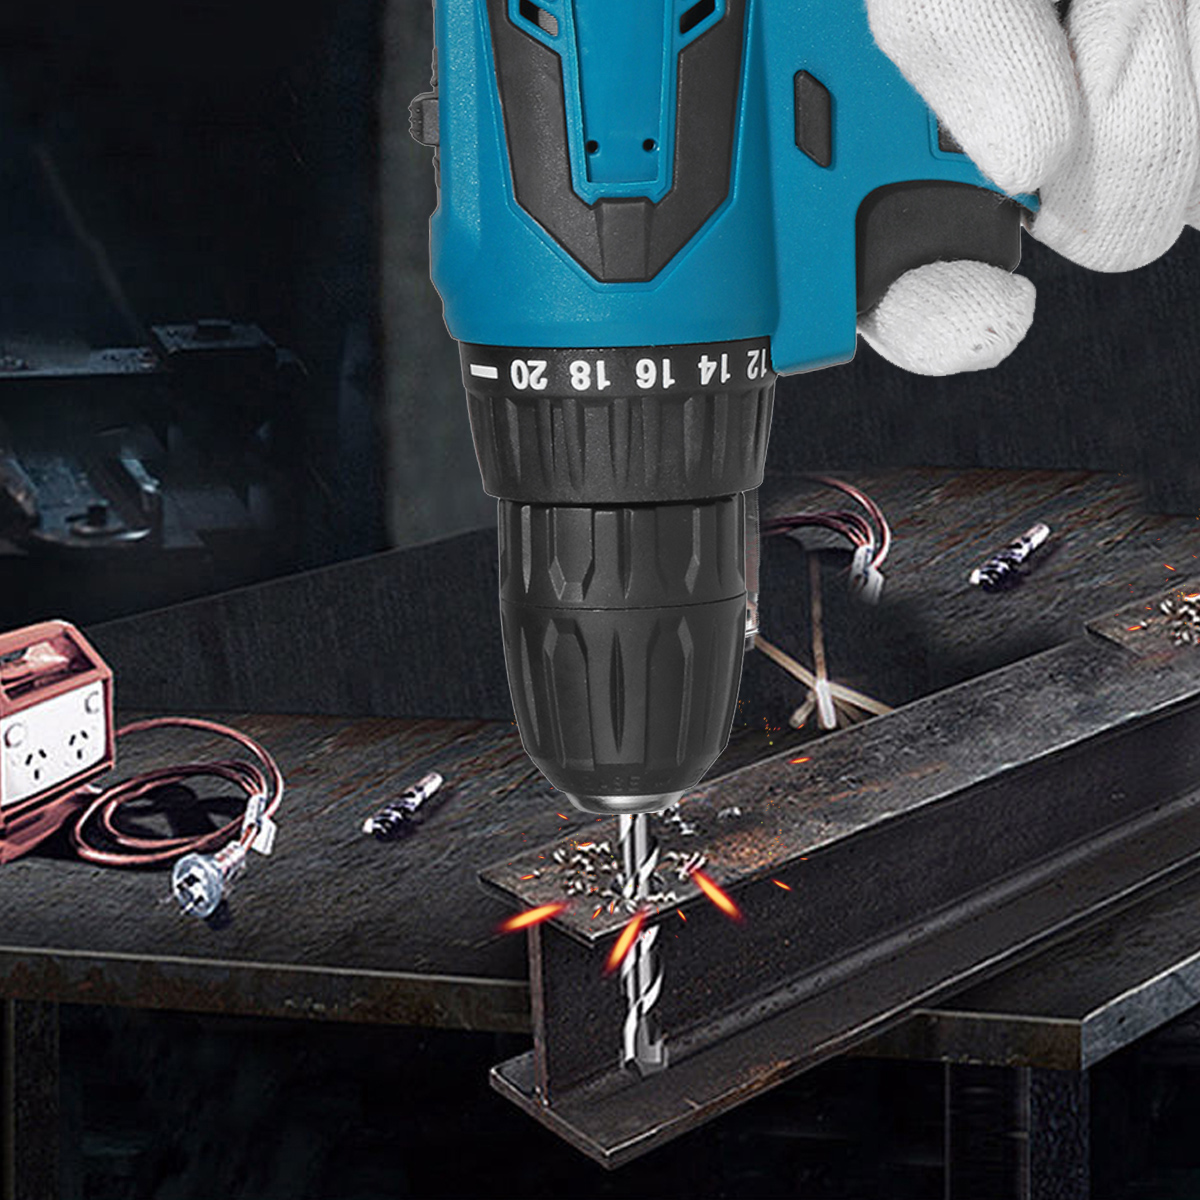 10mm-Rechargable-Electric-Drill-Screwdriver-1350RPM-2-Speed-Impact-Hand-Drill-Fit-Makita-Battery-1882944-7